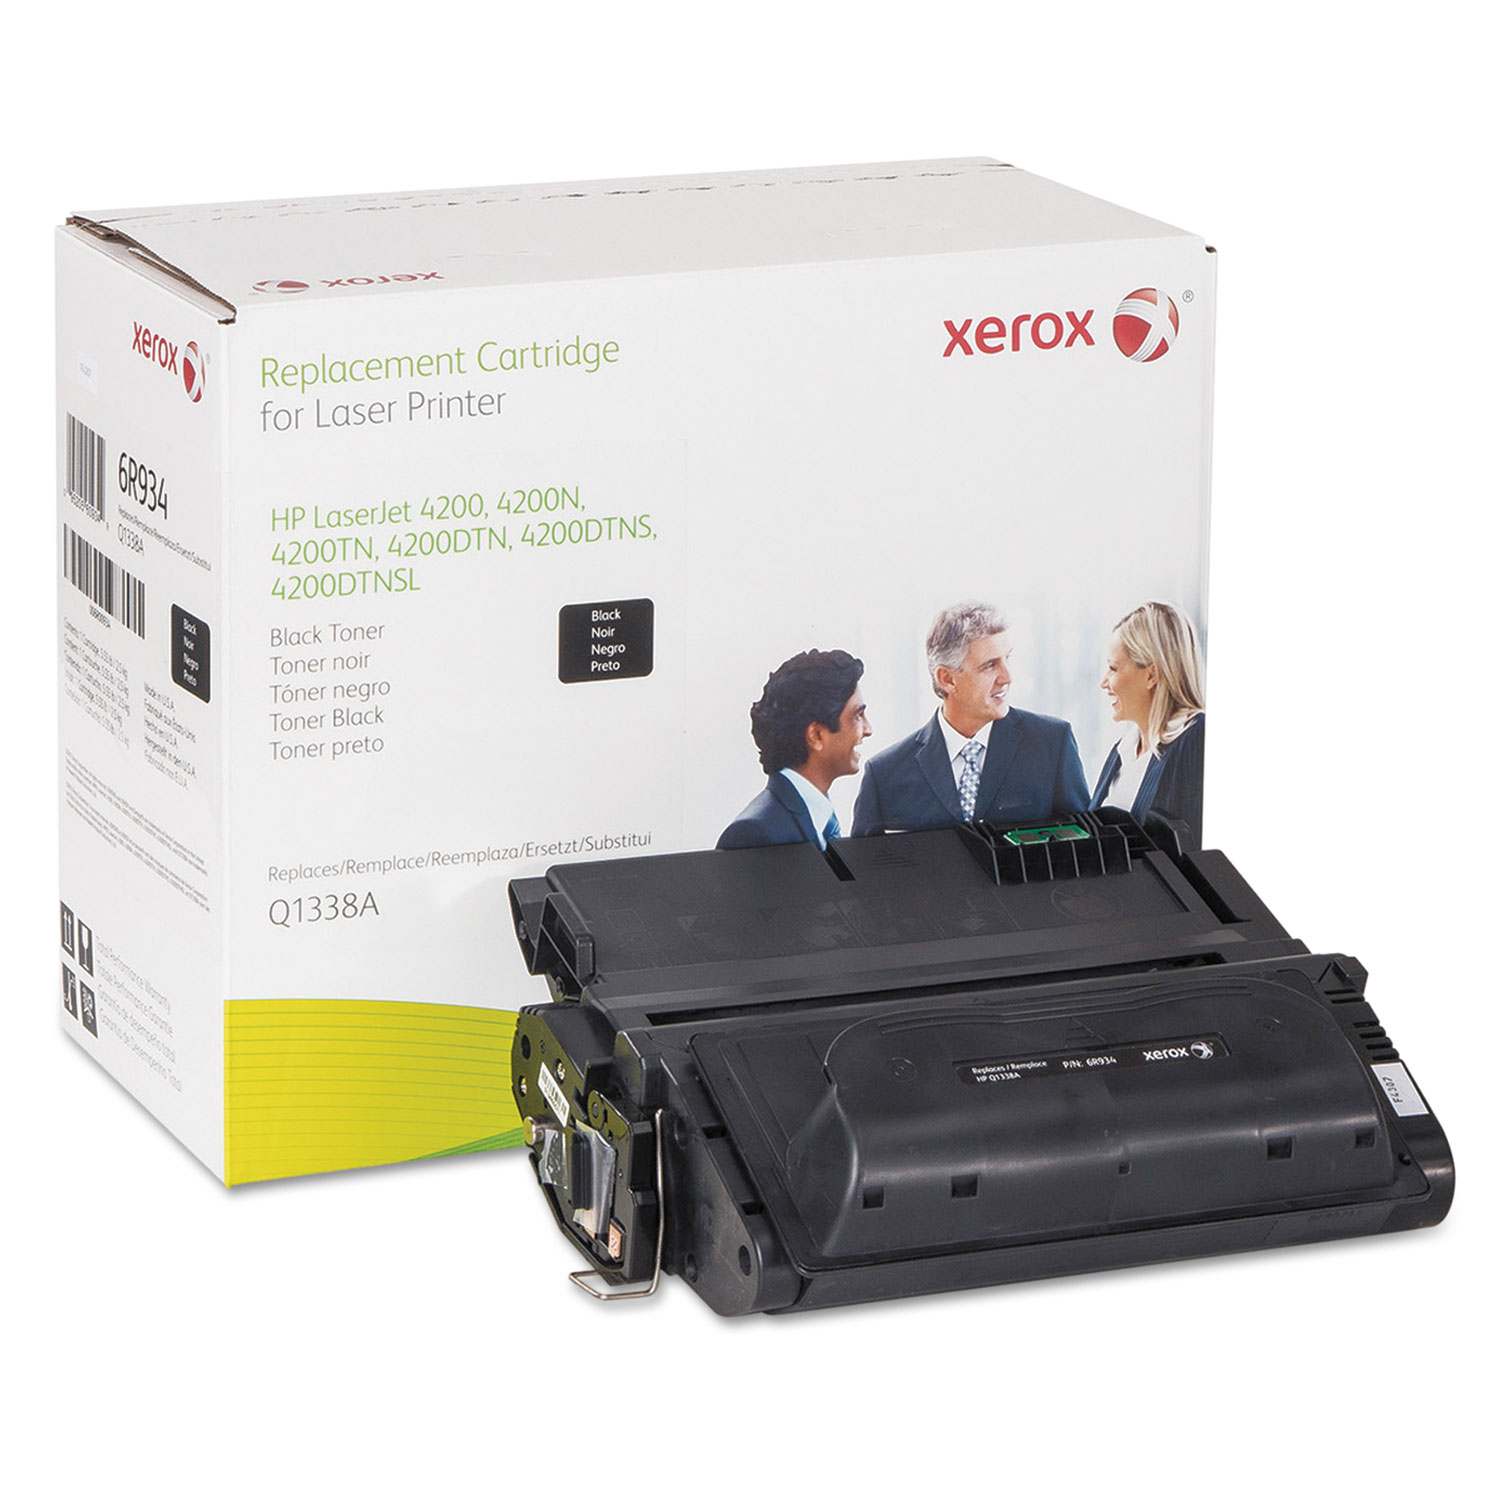  Xerox 006R00934 006R00934 Replacement Toner for Q1338A (38A), Black (XER006R00934) 